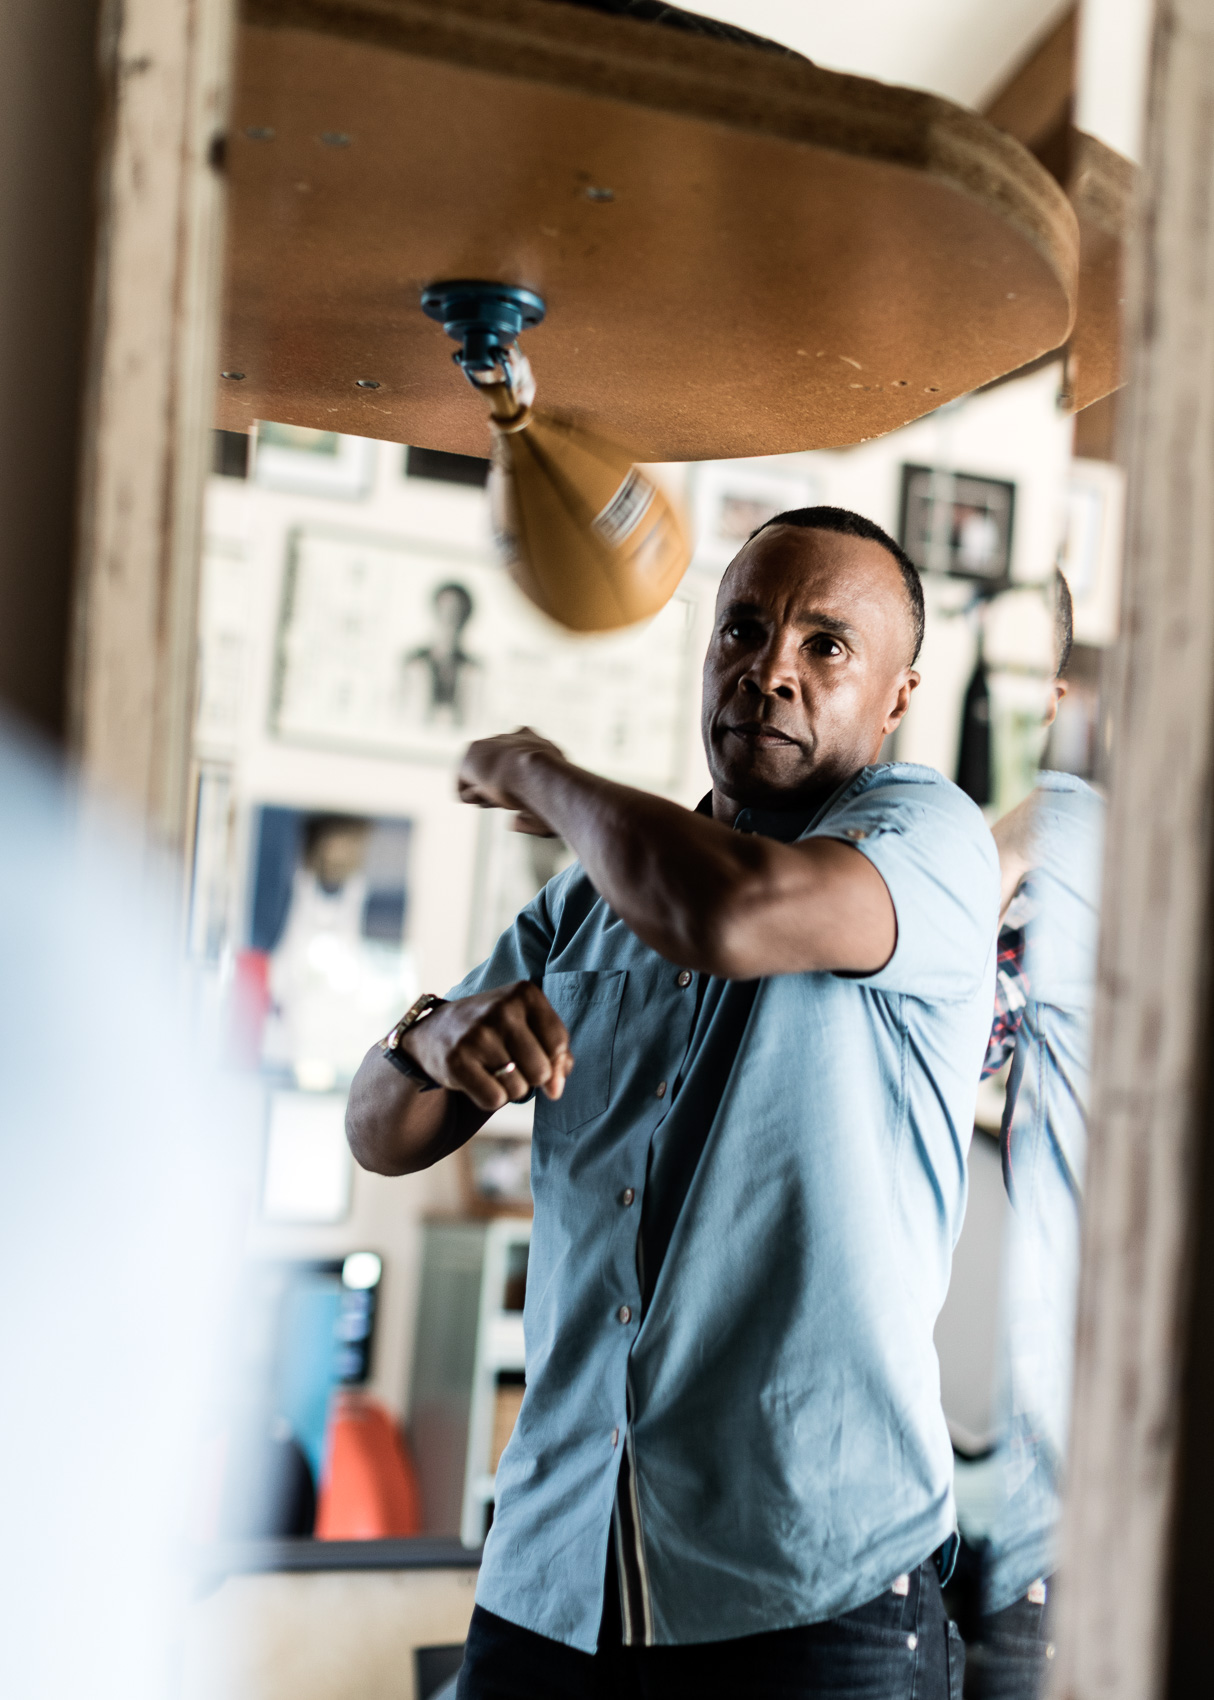 Sugar Ray Leonard, former professional boxer | Los Angeles | Editorial and Commercial Photographer Patrick Strattner